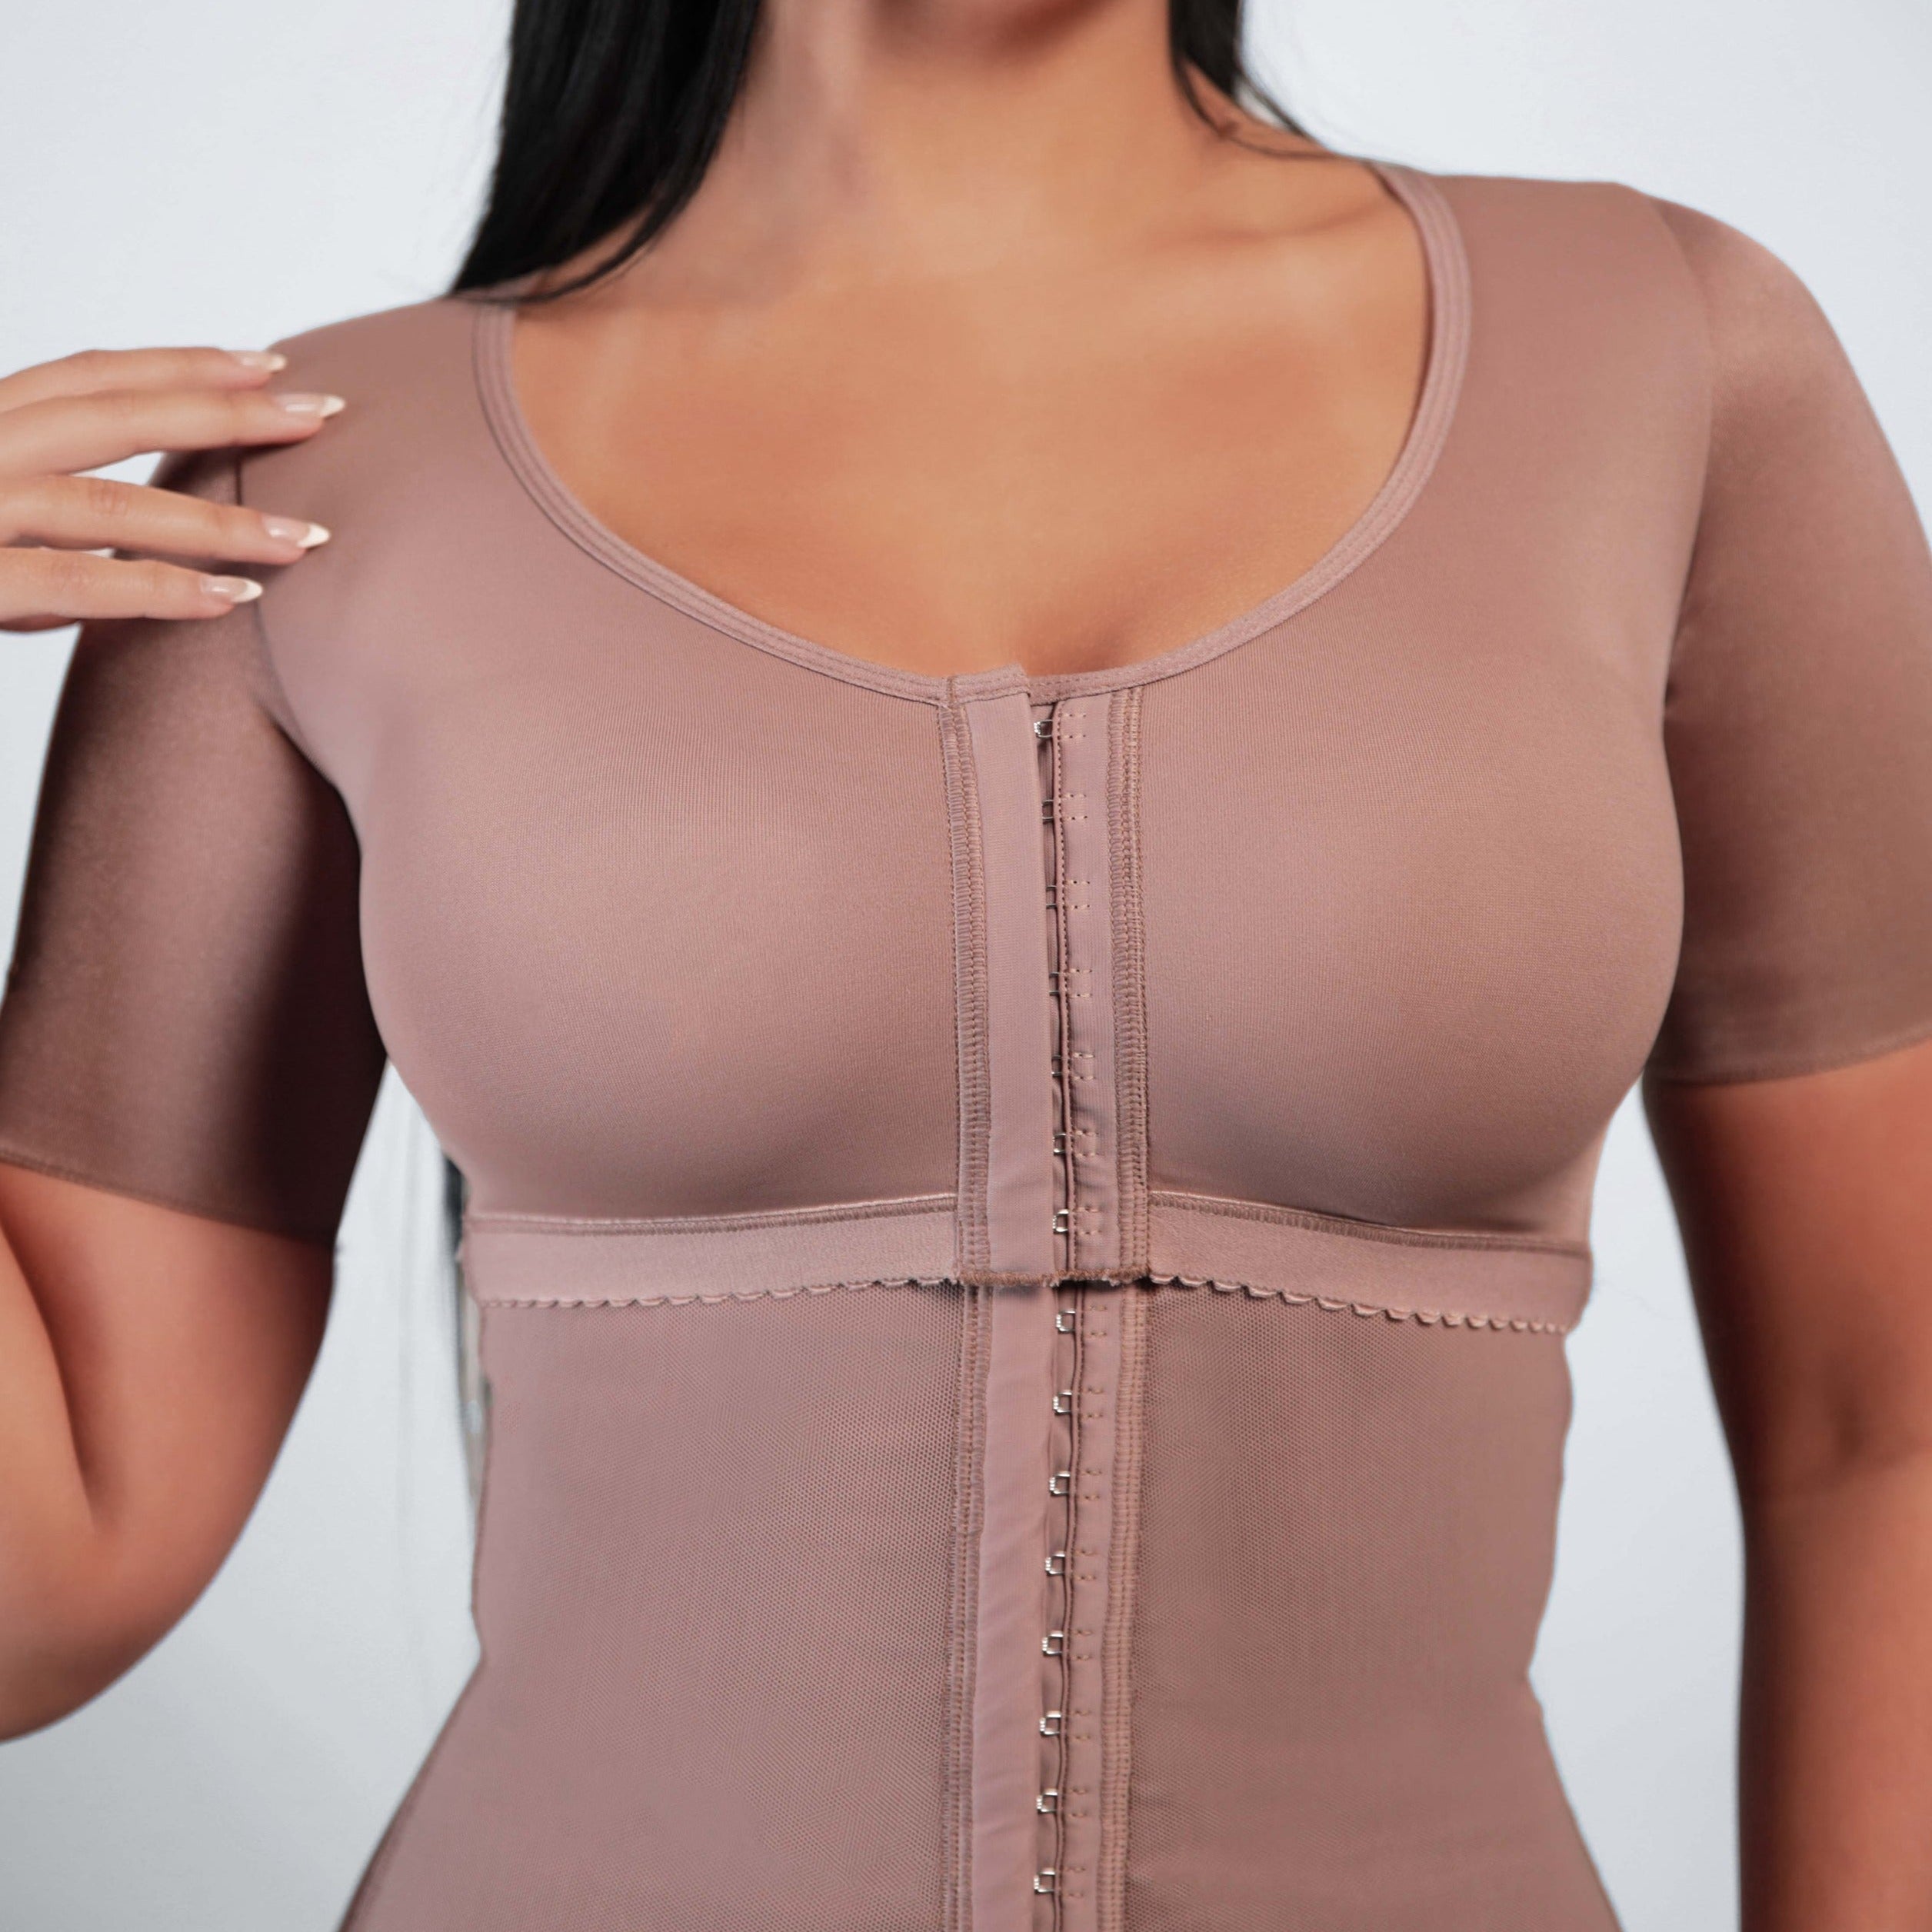 Ogee Recovery on Instagram: The Ogee faja with bra provides confortable  support through the chest, arms and holds the breast firmly in place  without adding too much pressure. #ogee #ogeefaja #miami #compression #